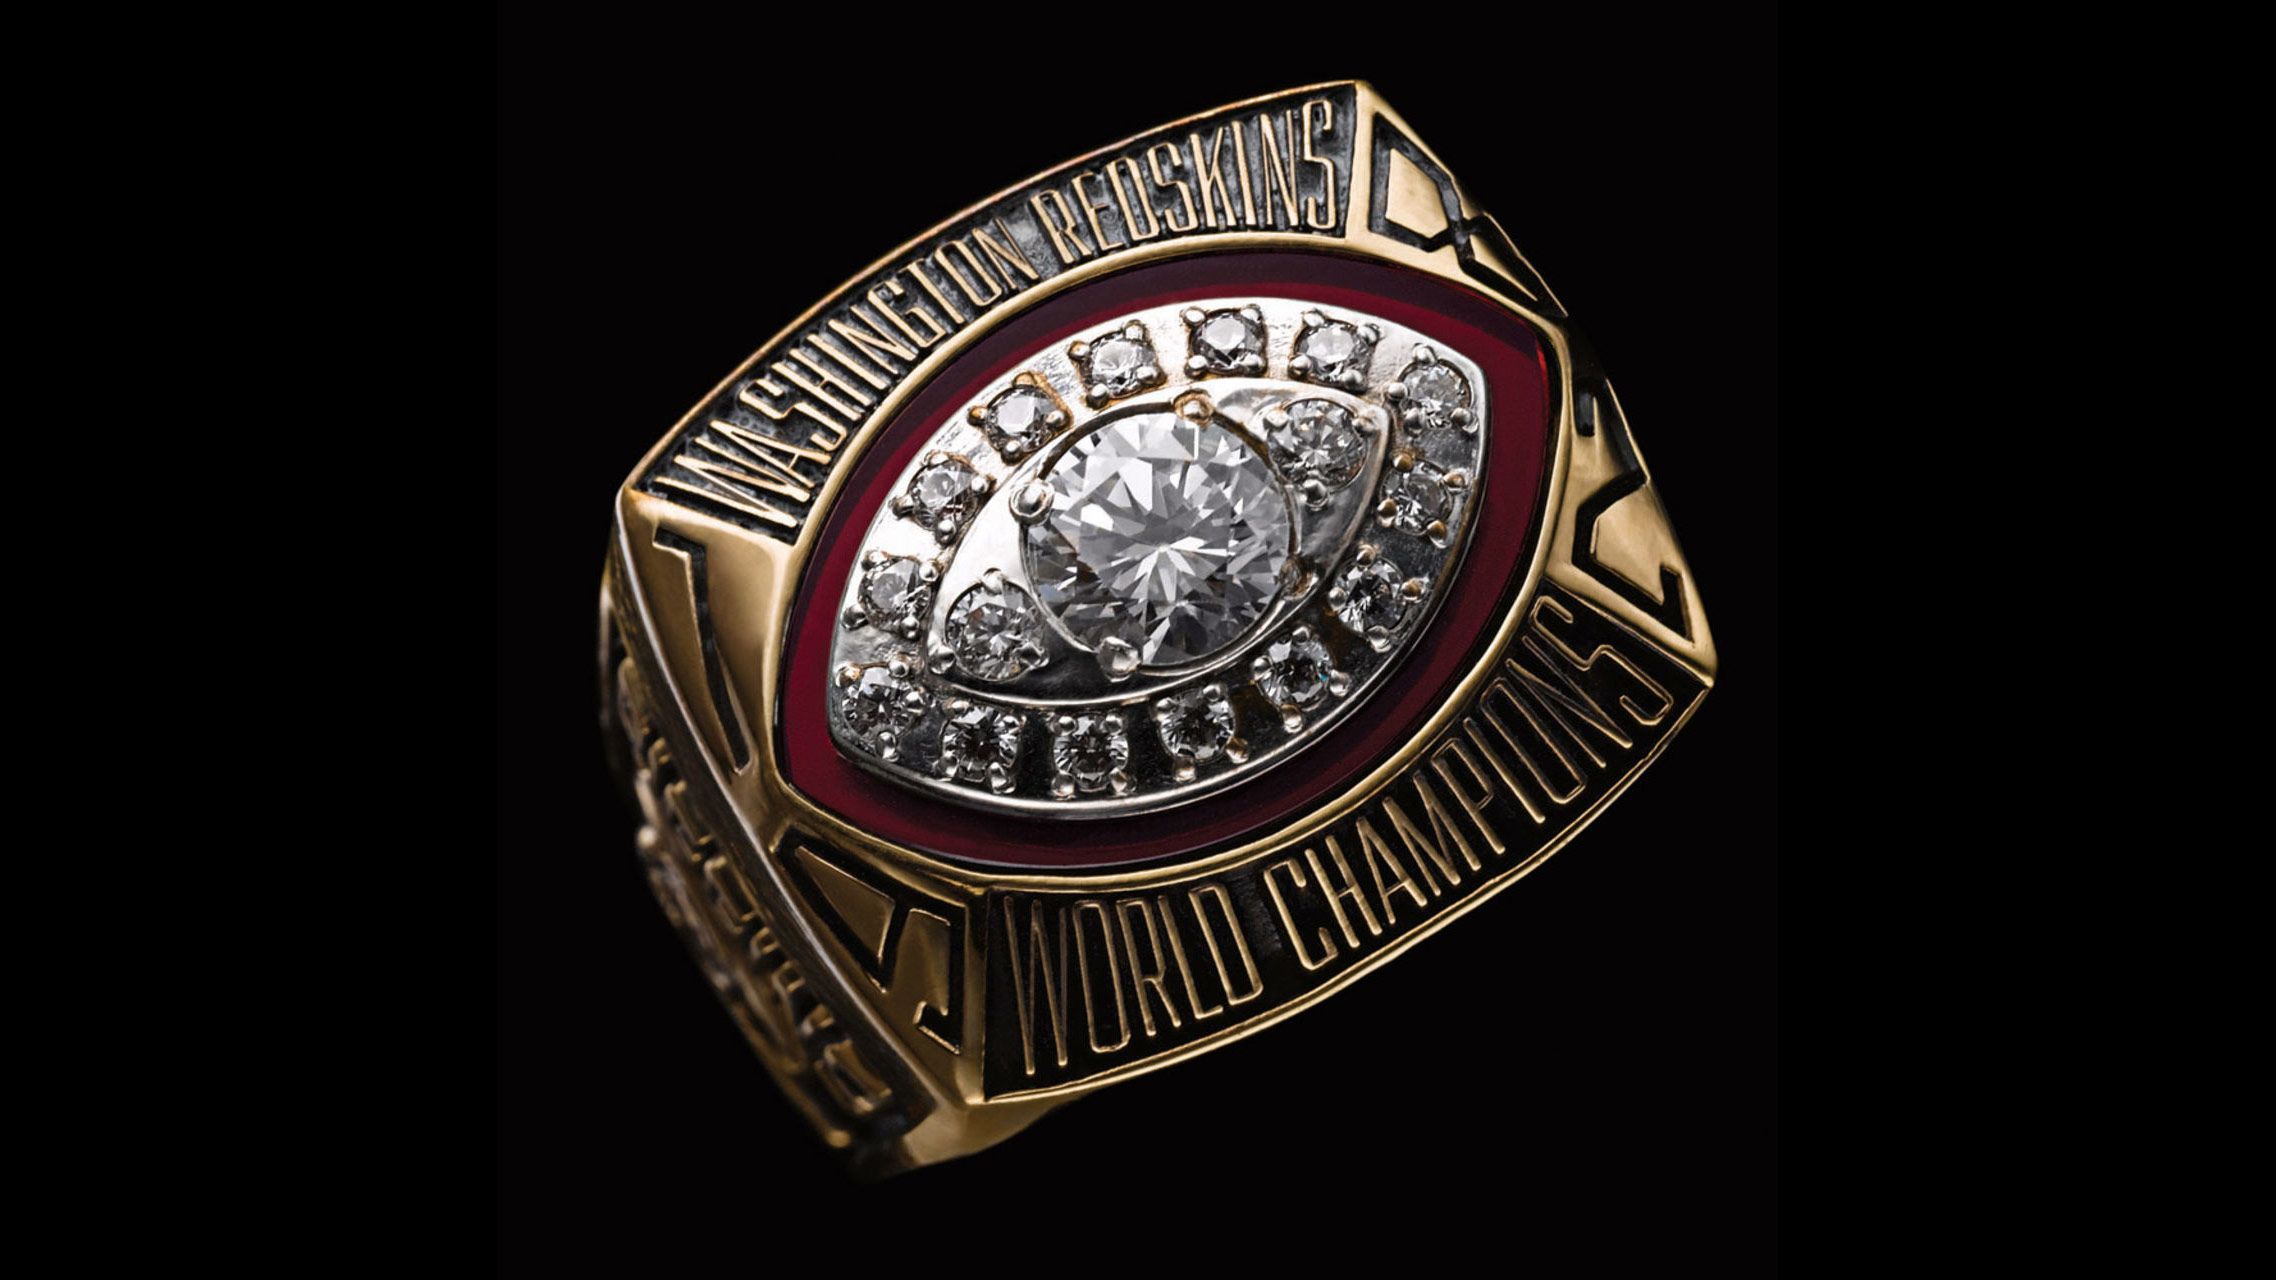 2022 super bowl ring cost